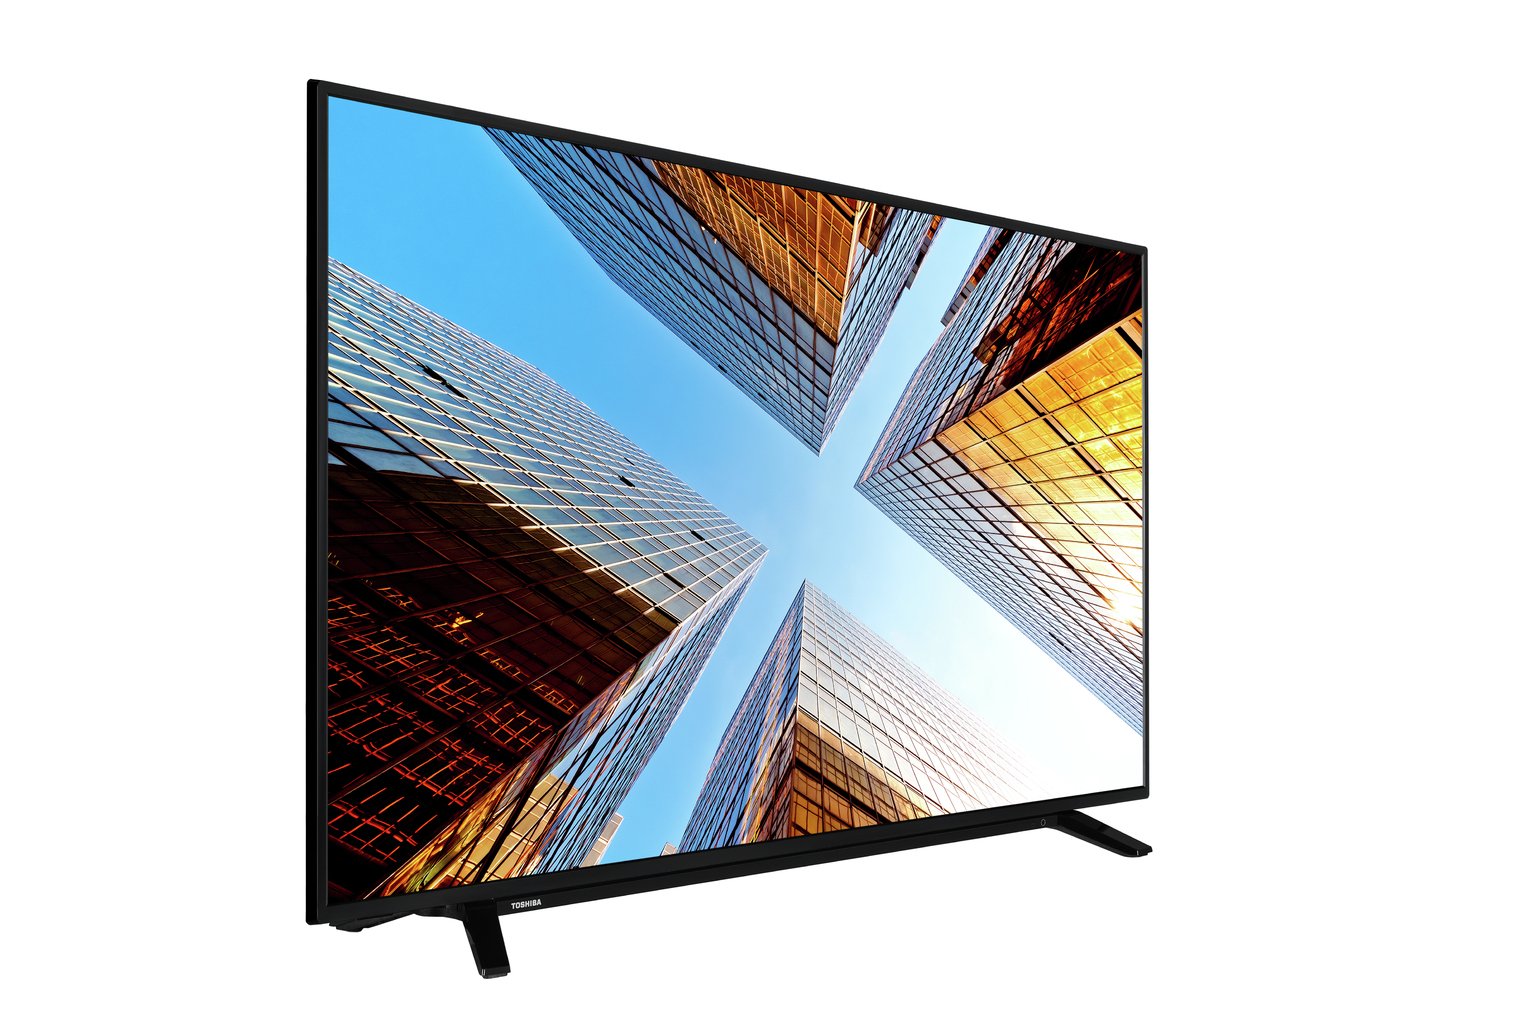 Toshiba 55 Inch Smart 4K Ultra HD LED TV with HDR Review